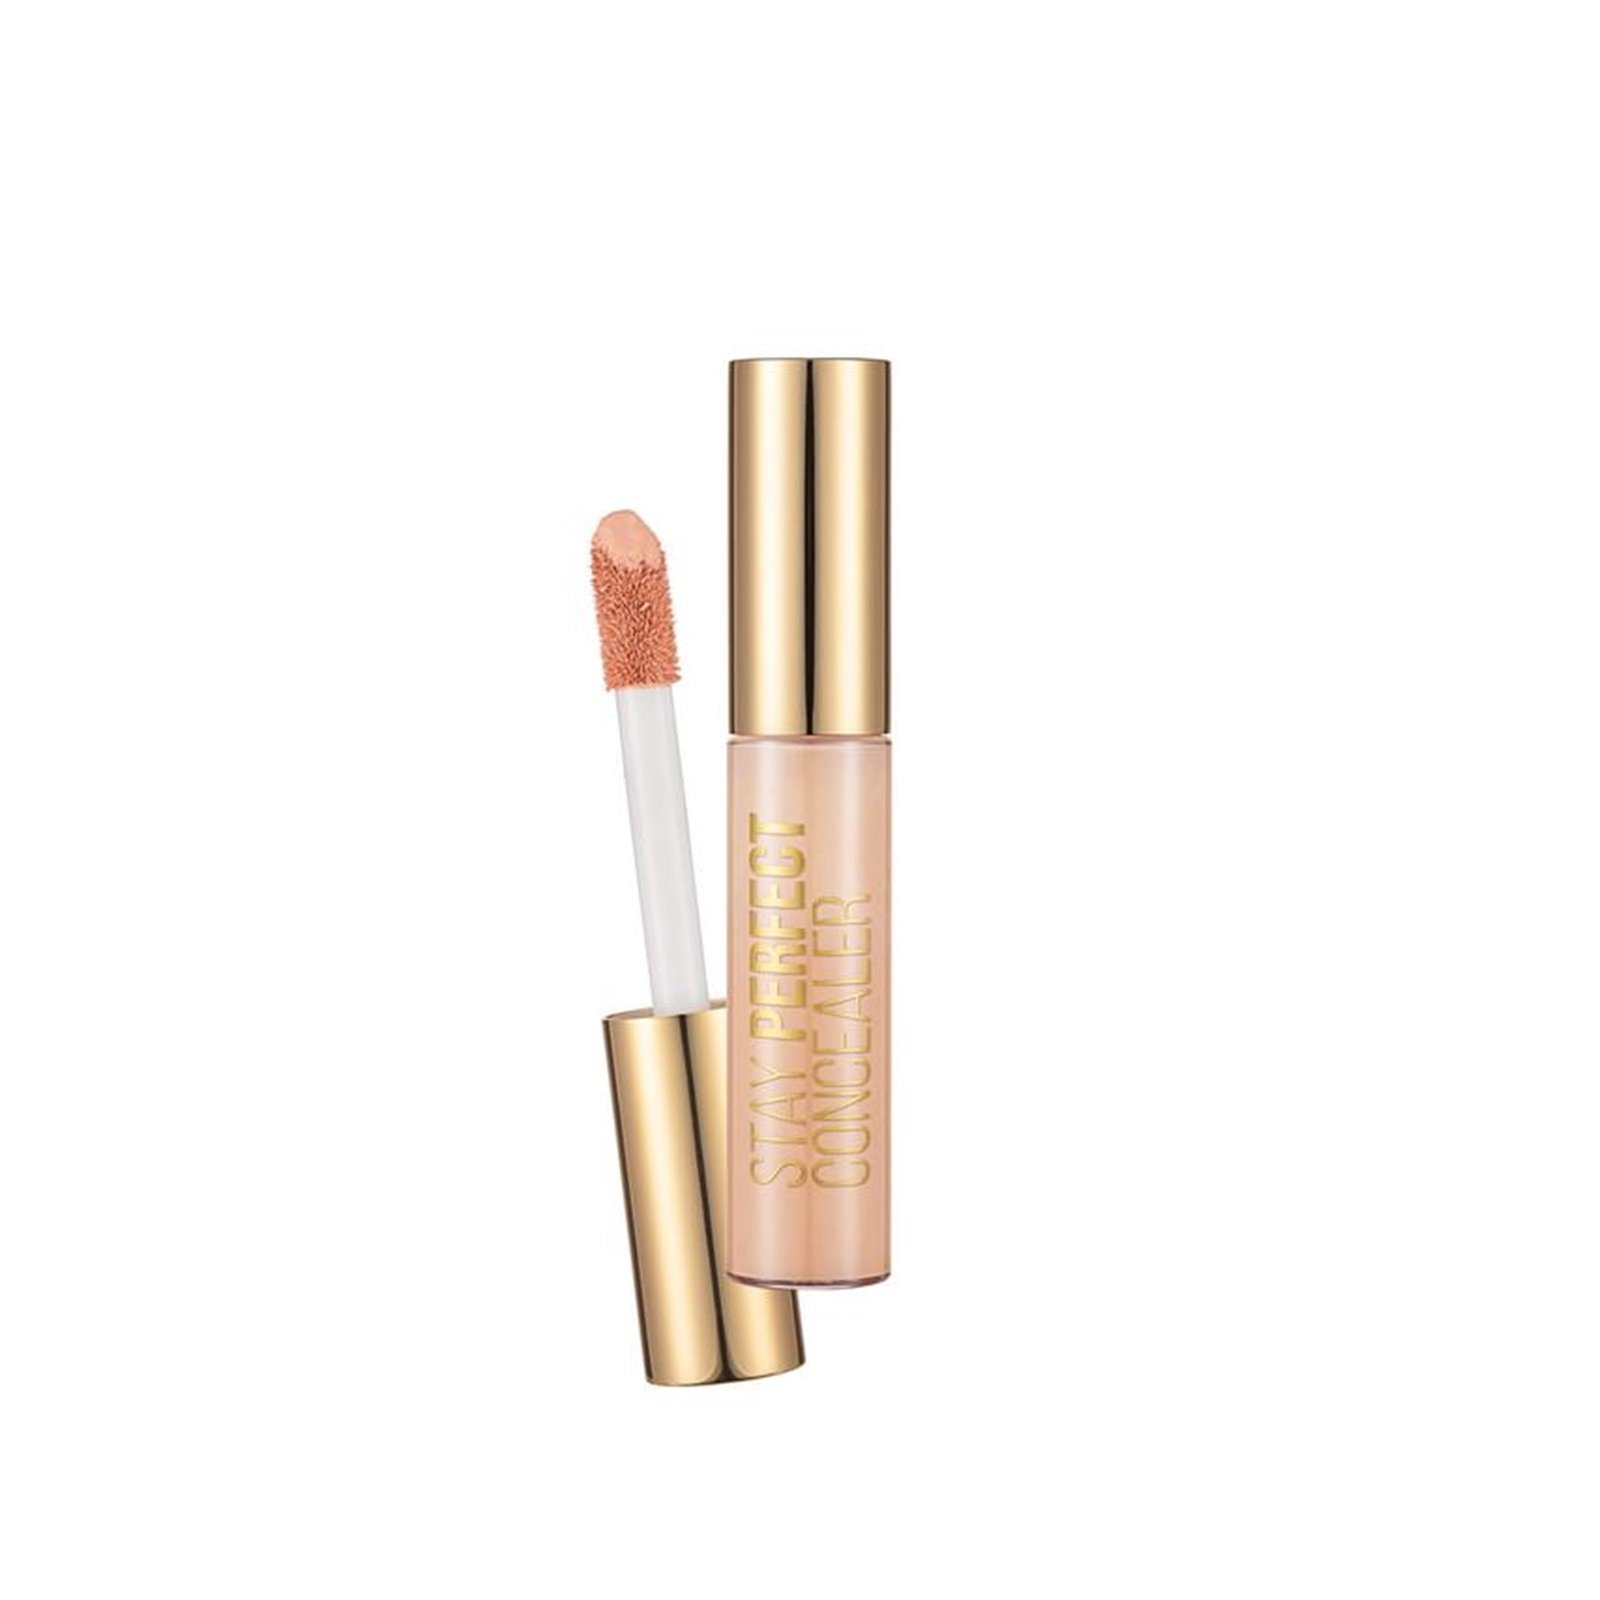 https://static.beautytocare.com/cdn-cgi/image/width=1600,height=1600,f=auto/media/catalog/product//f/l/flormar-stay-perfect-concealer-007-light-beige-12-5ml.jpg